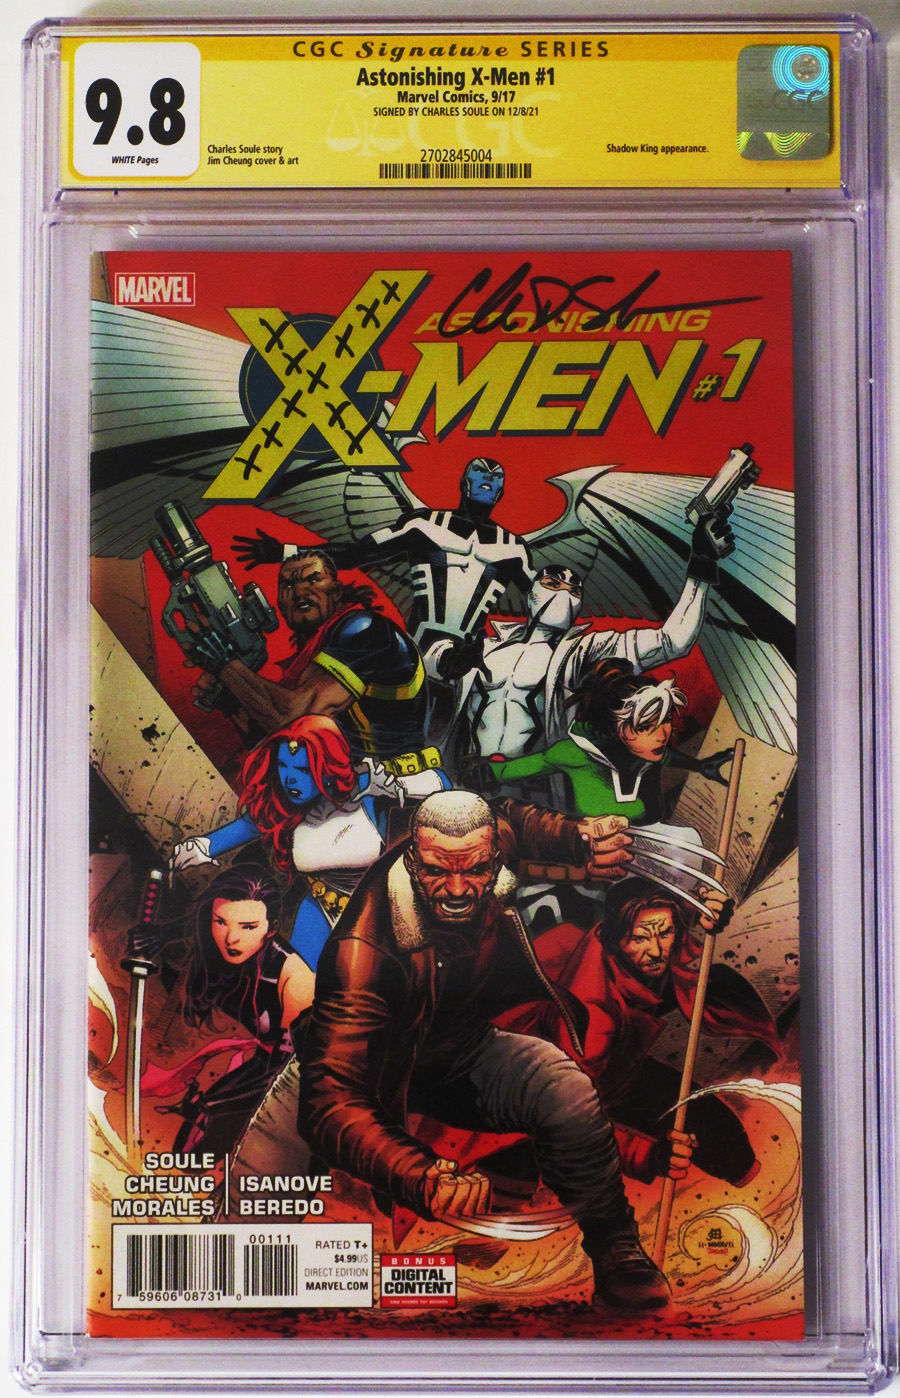 Astonishing X-Men Vol 4 #1 Cover M Regular Jim Cheung Cover Signed By Charles Soule CGC 9.8